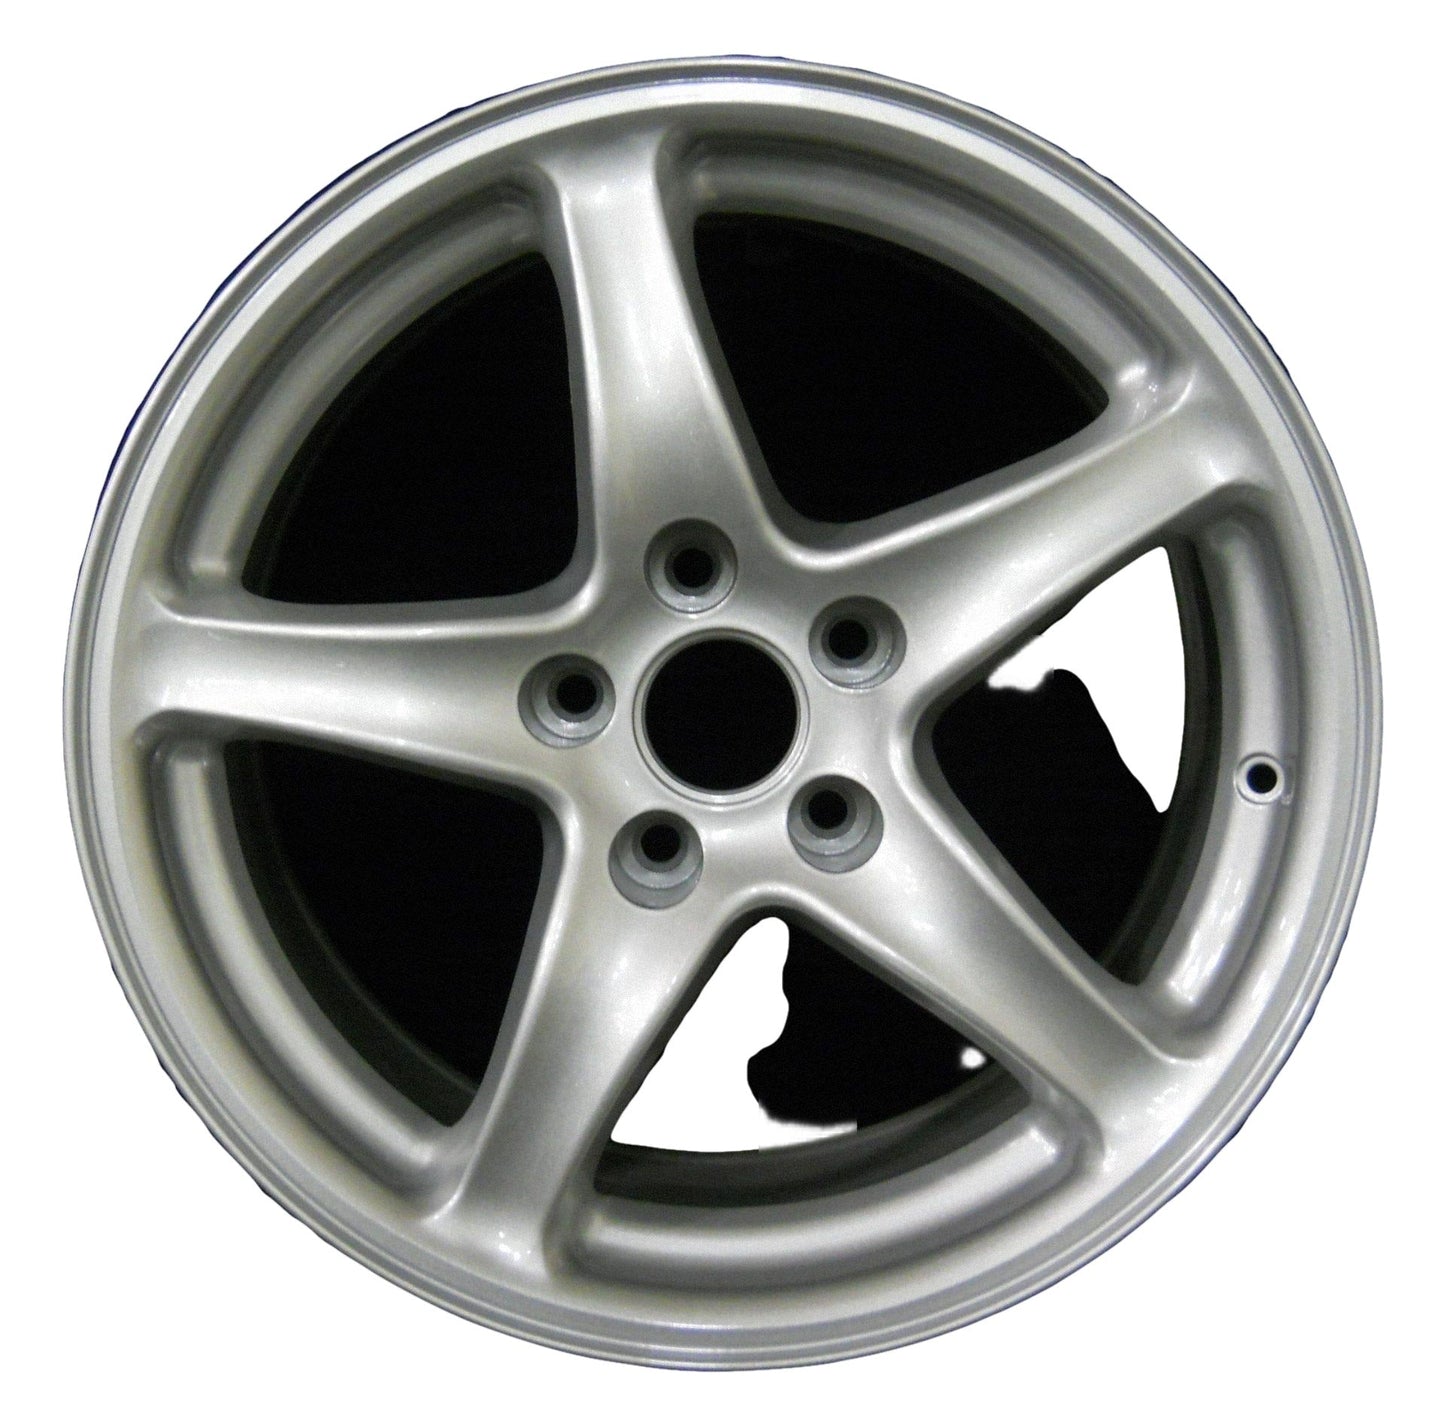 Ford Mustang  1998, 1999, 2000, 2001, 2002, 2003, 2004 Factory OEM Car Wheel Size 17x8 Alloy WAO.3285.PS02.FF